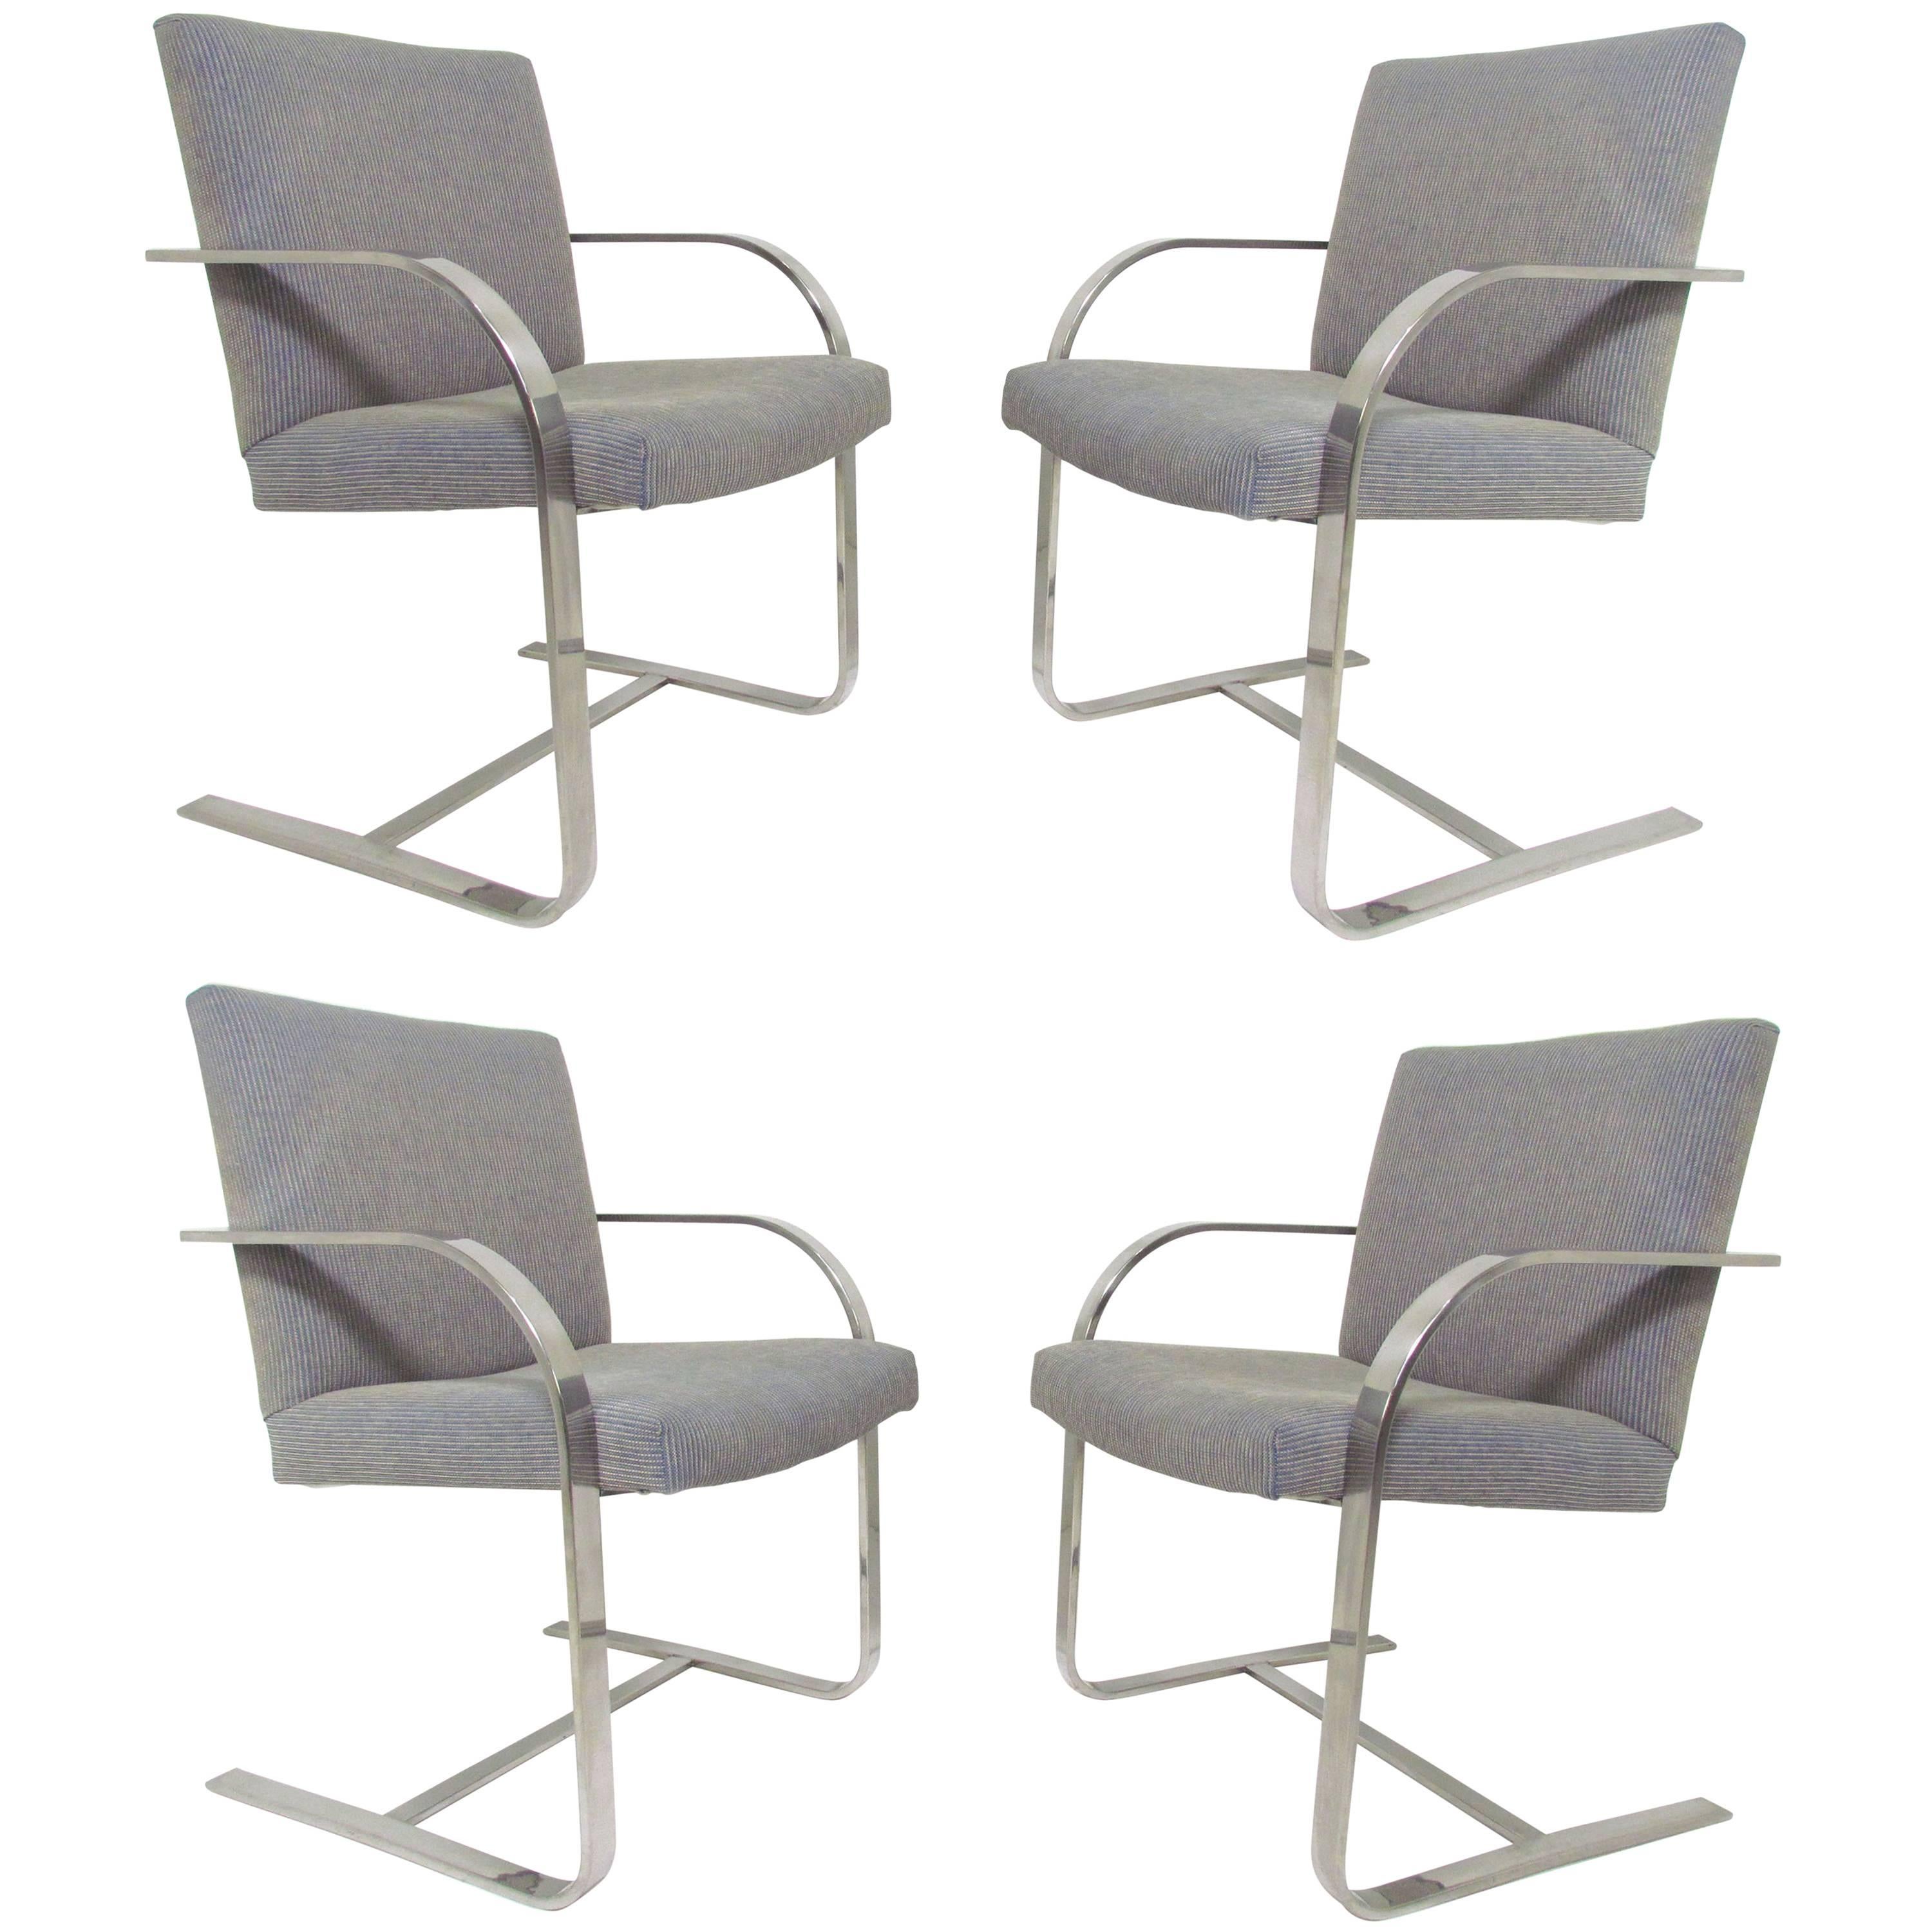 Set of Four Flat Bar Chrome Brno Chairs, Style of Mies Van Der Rohe